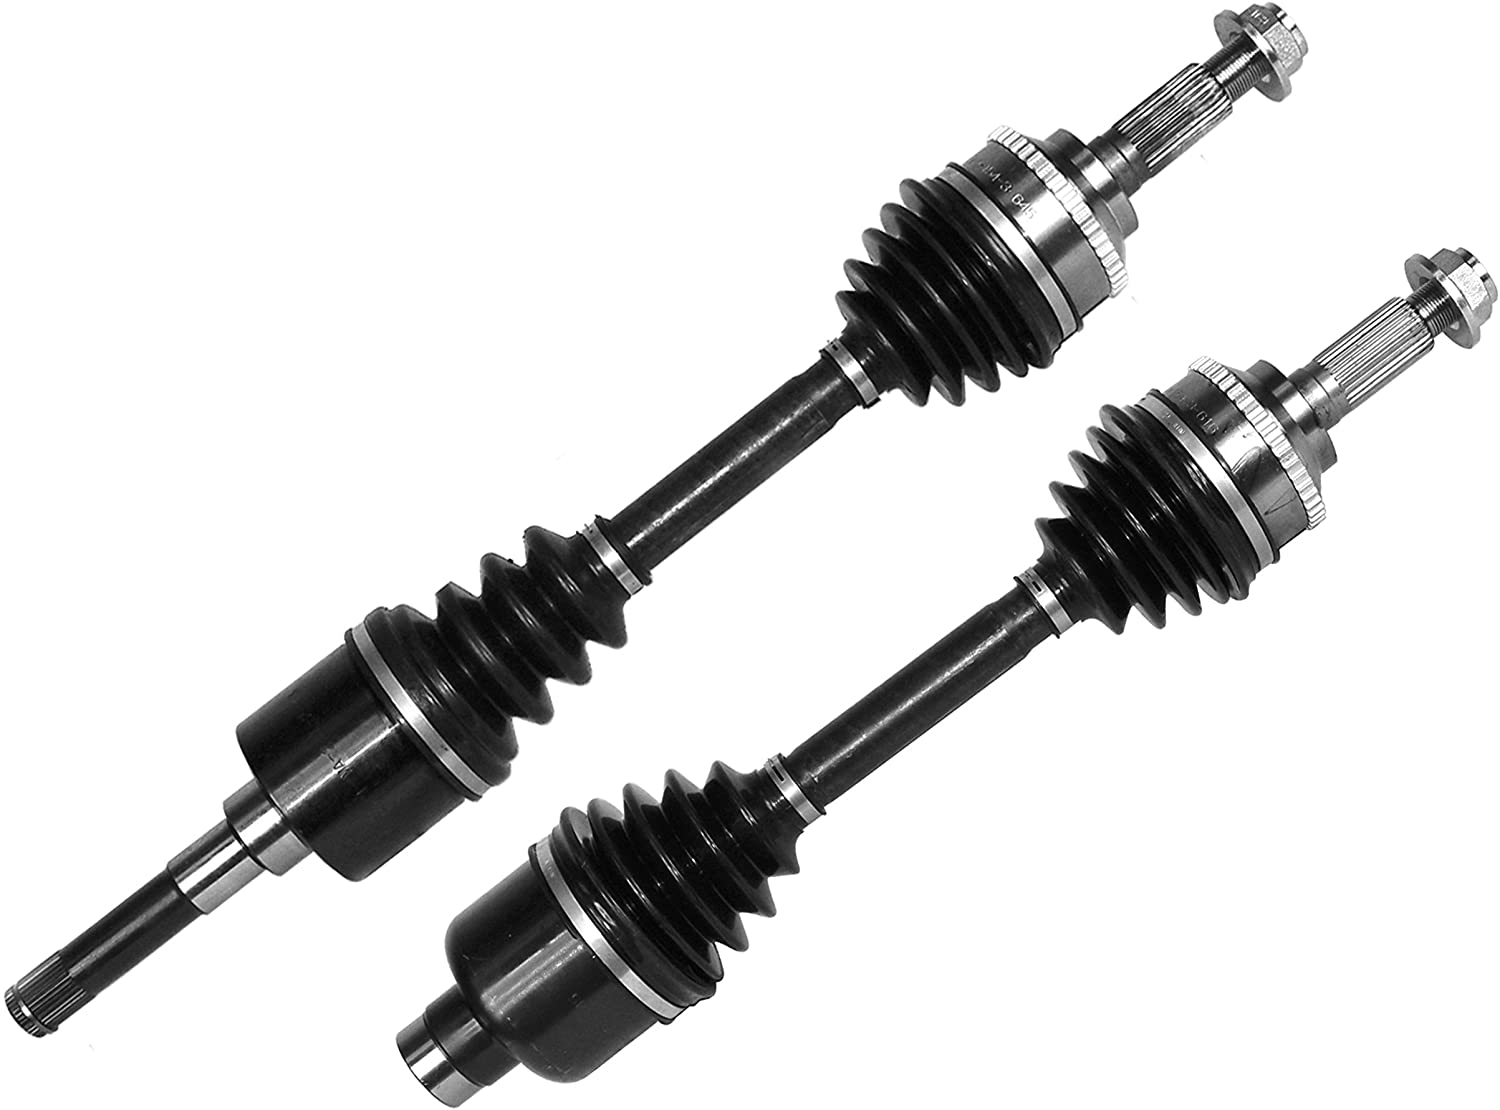 DTA DT1509550941 Front Driver and Passenger Side Premium CV Axles (New Drive Axle Assemblies - 2 pcs (Pair)) Compatible with Ford Escape, Mazda Tribute, Mercury Mariner With Automatic Transmission